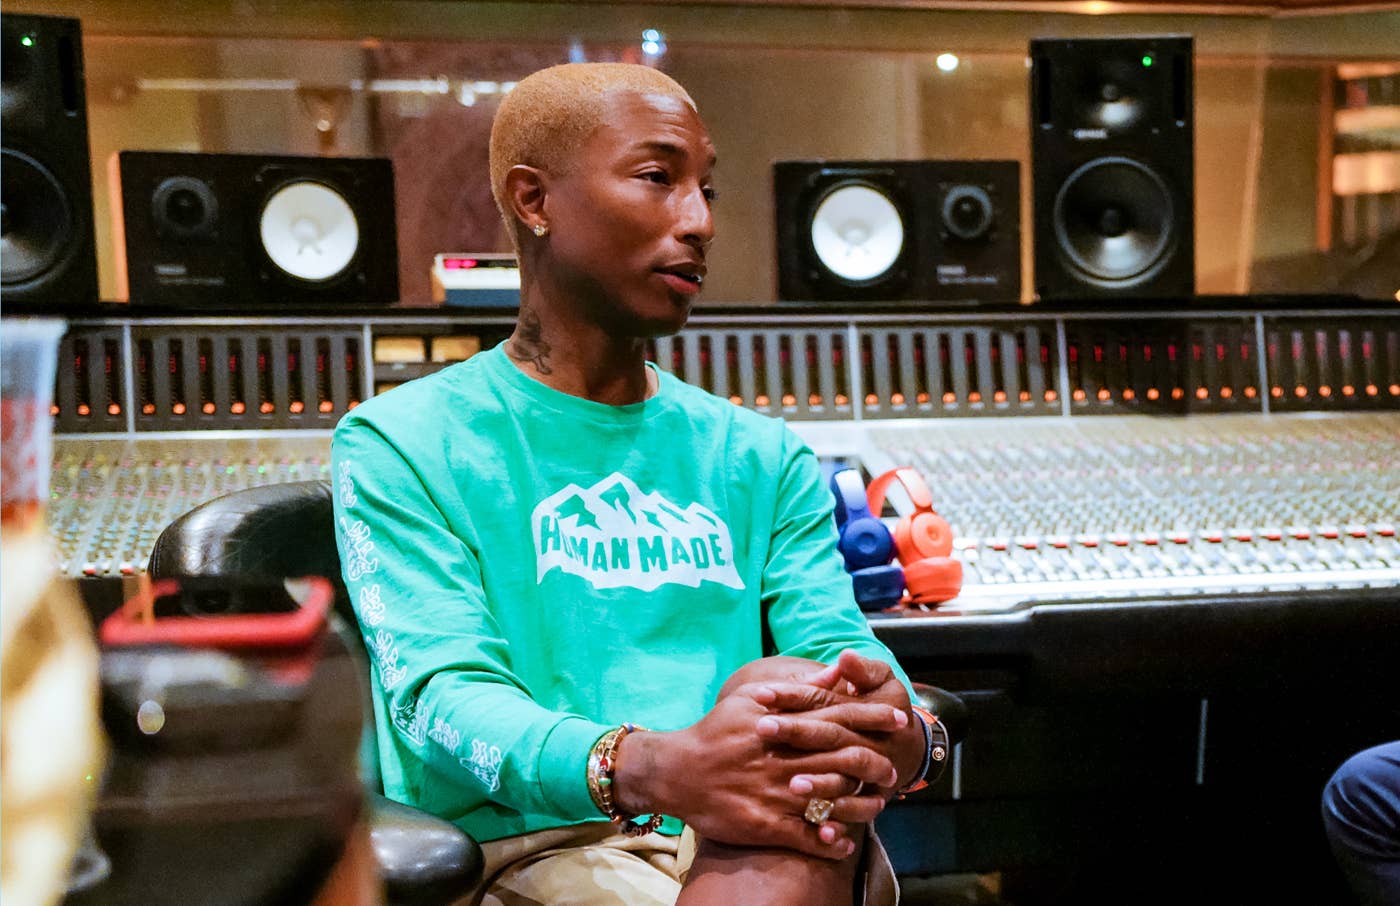 4 Ways Pharrell Williams Has Made An Impact: Supporting The Music